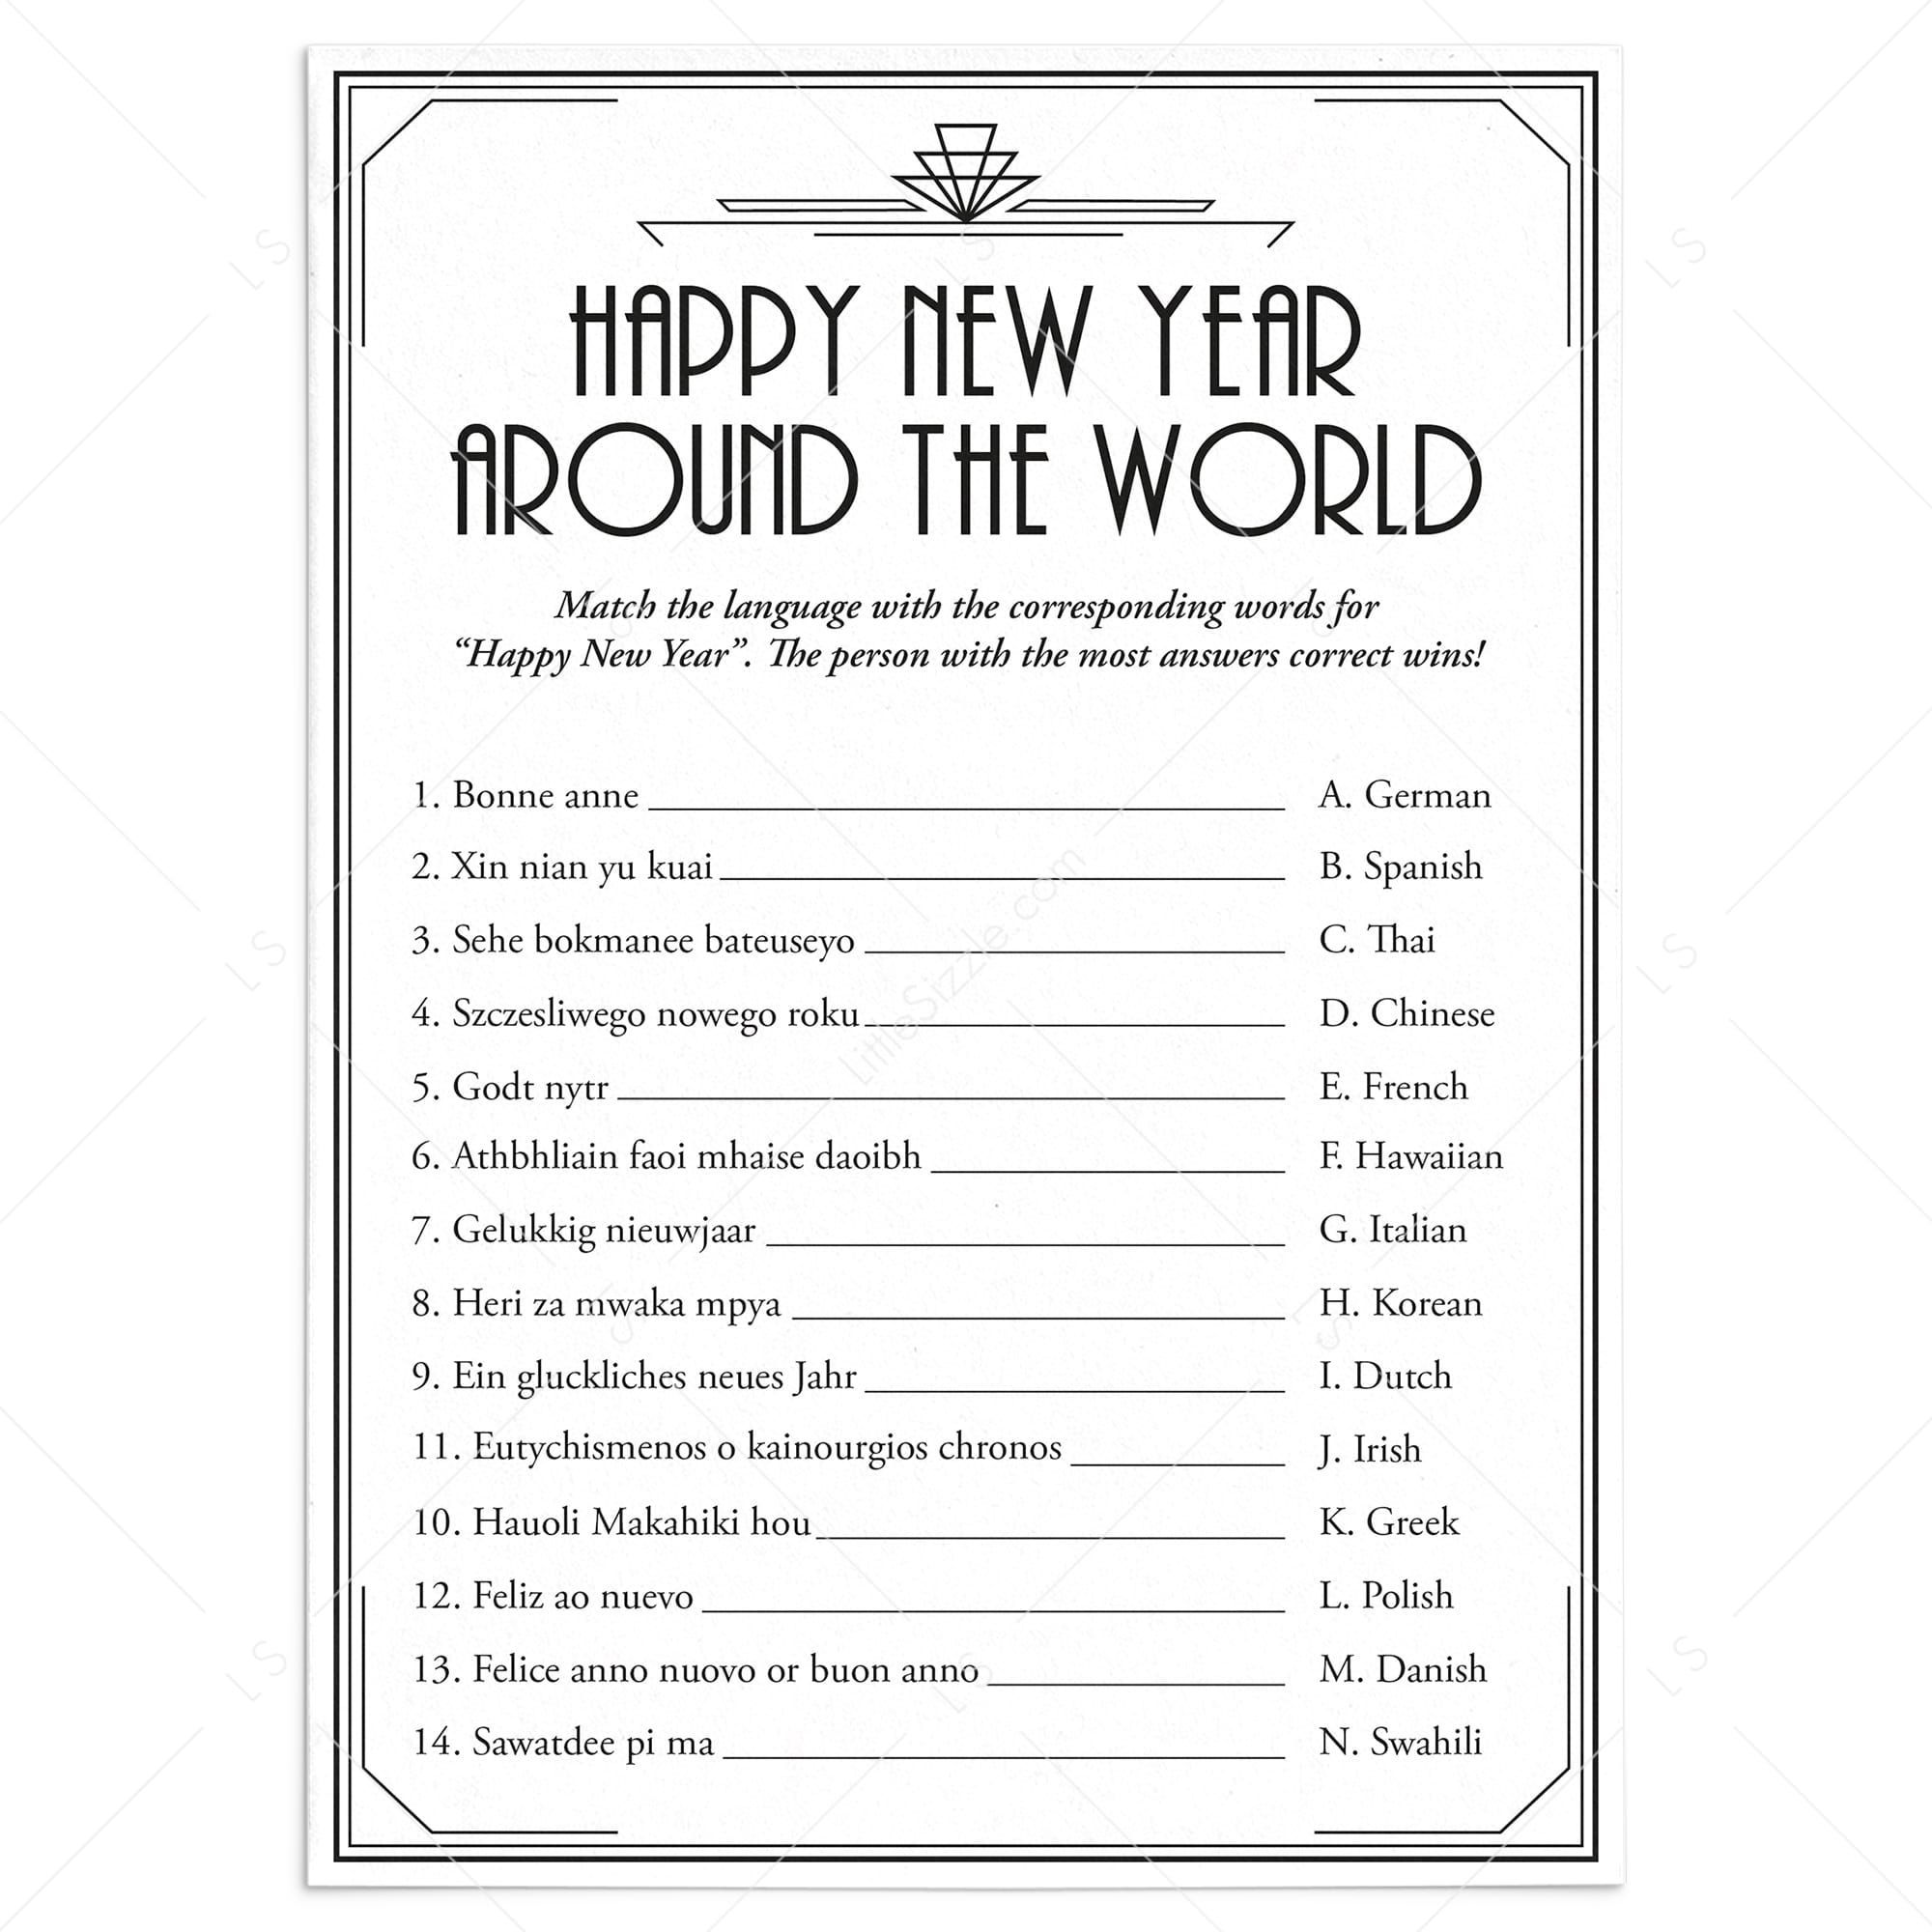 Great Gatsby New Year's Eve Party Printable Around The World by LittleSizzle